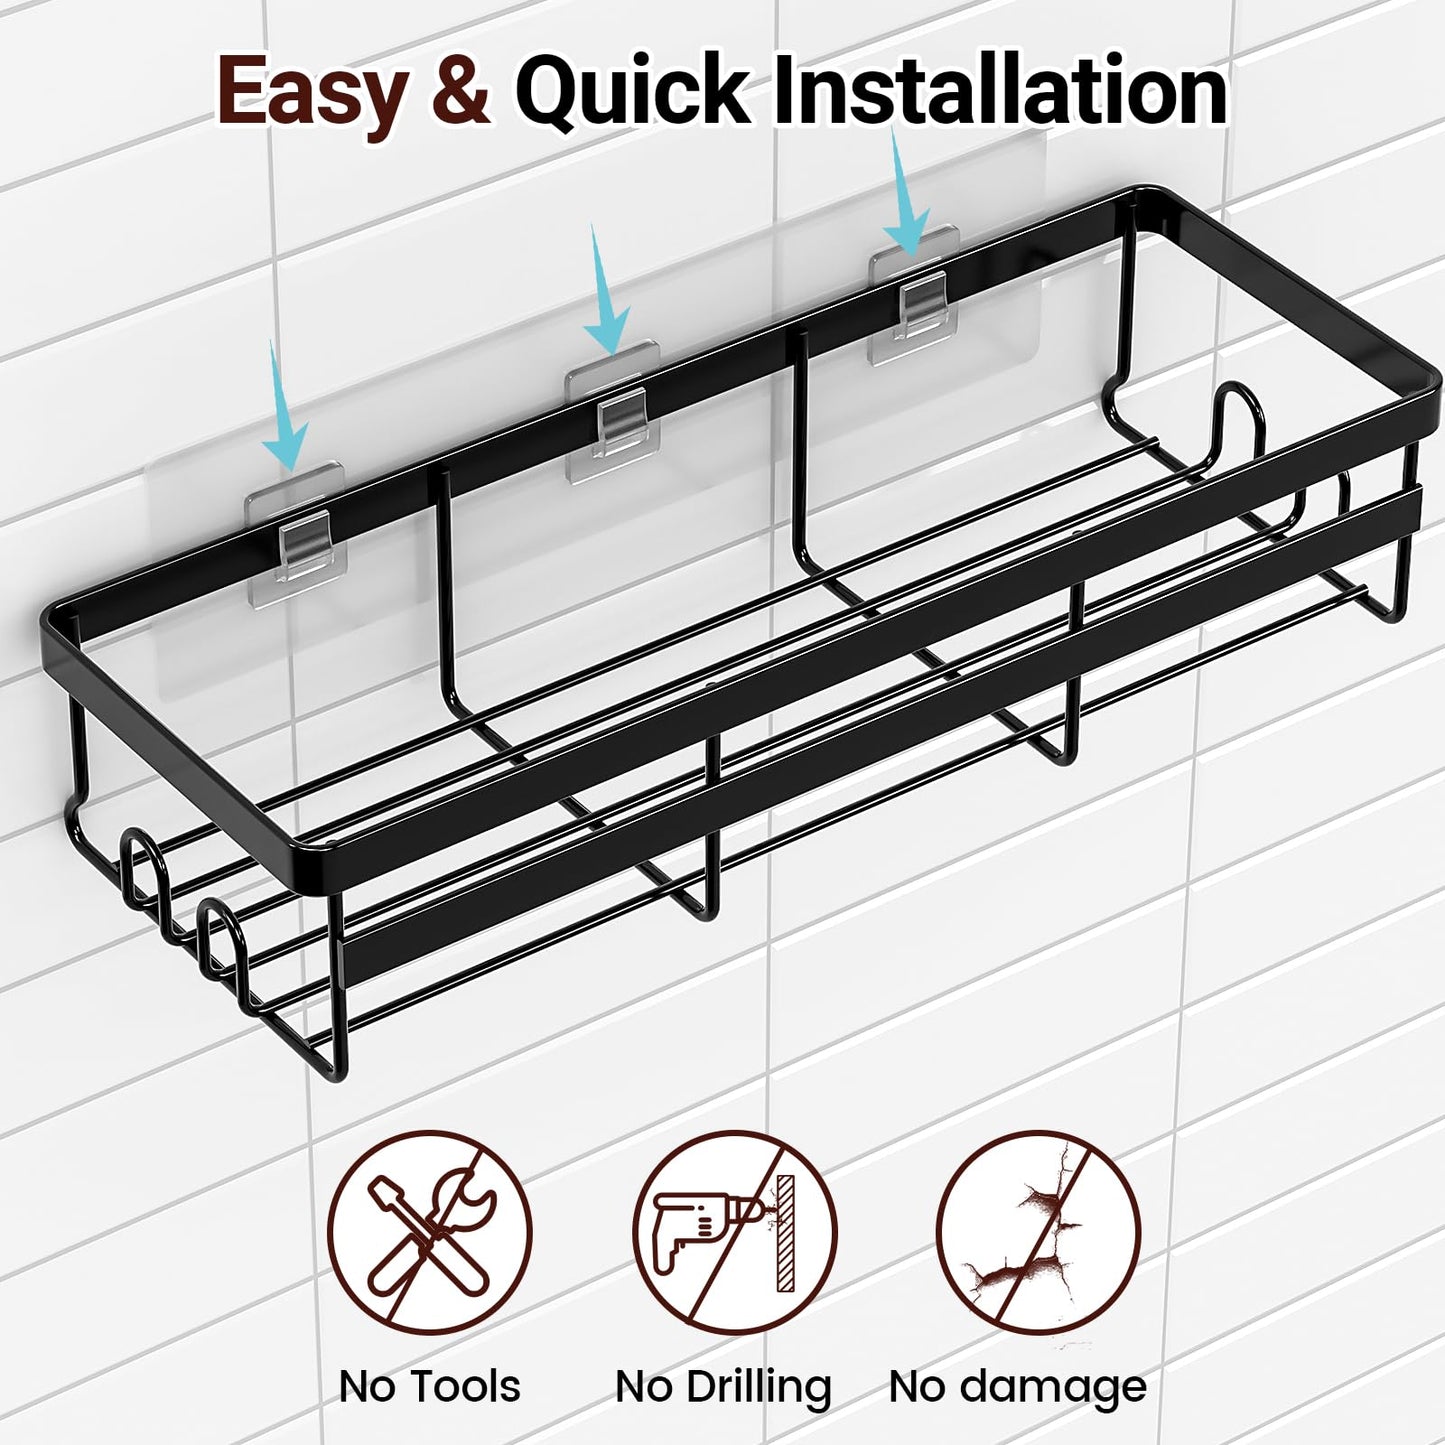 Adhesive Shower Caddy Shelf, 2 Pack - Hanging Bathroom Organizer, No Drilling Stainless Black Shelves for Storage & Home Decor